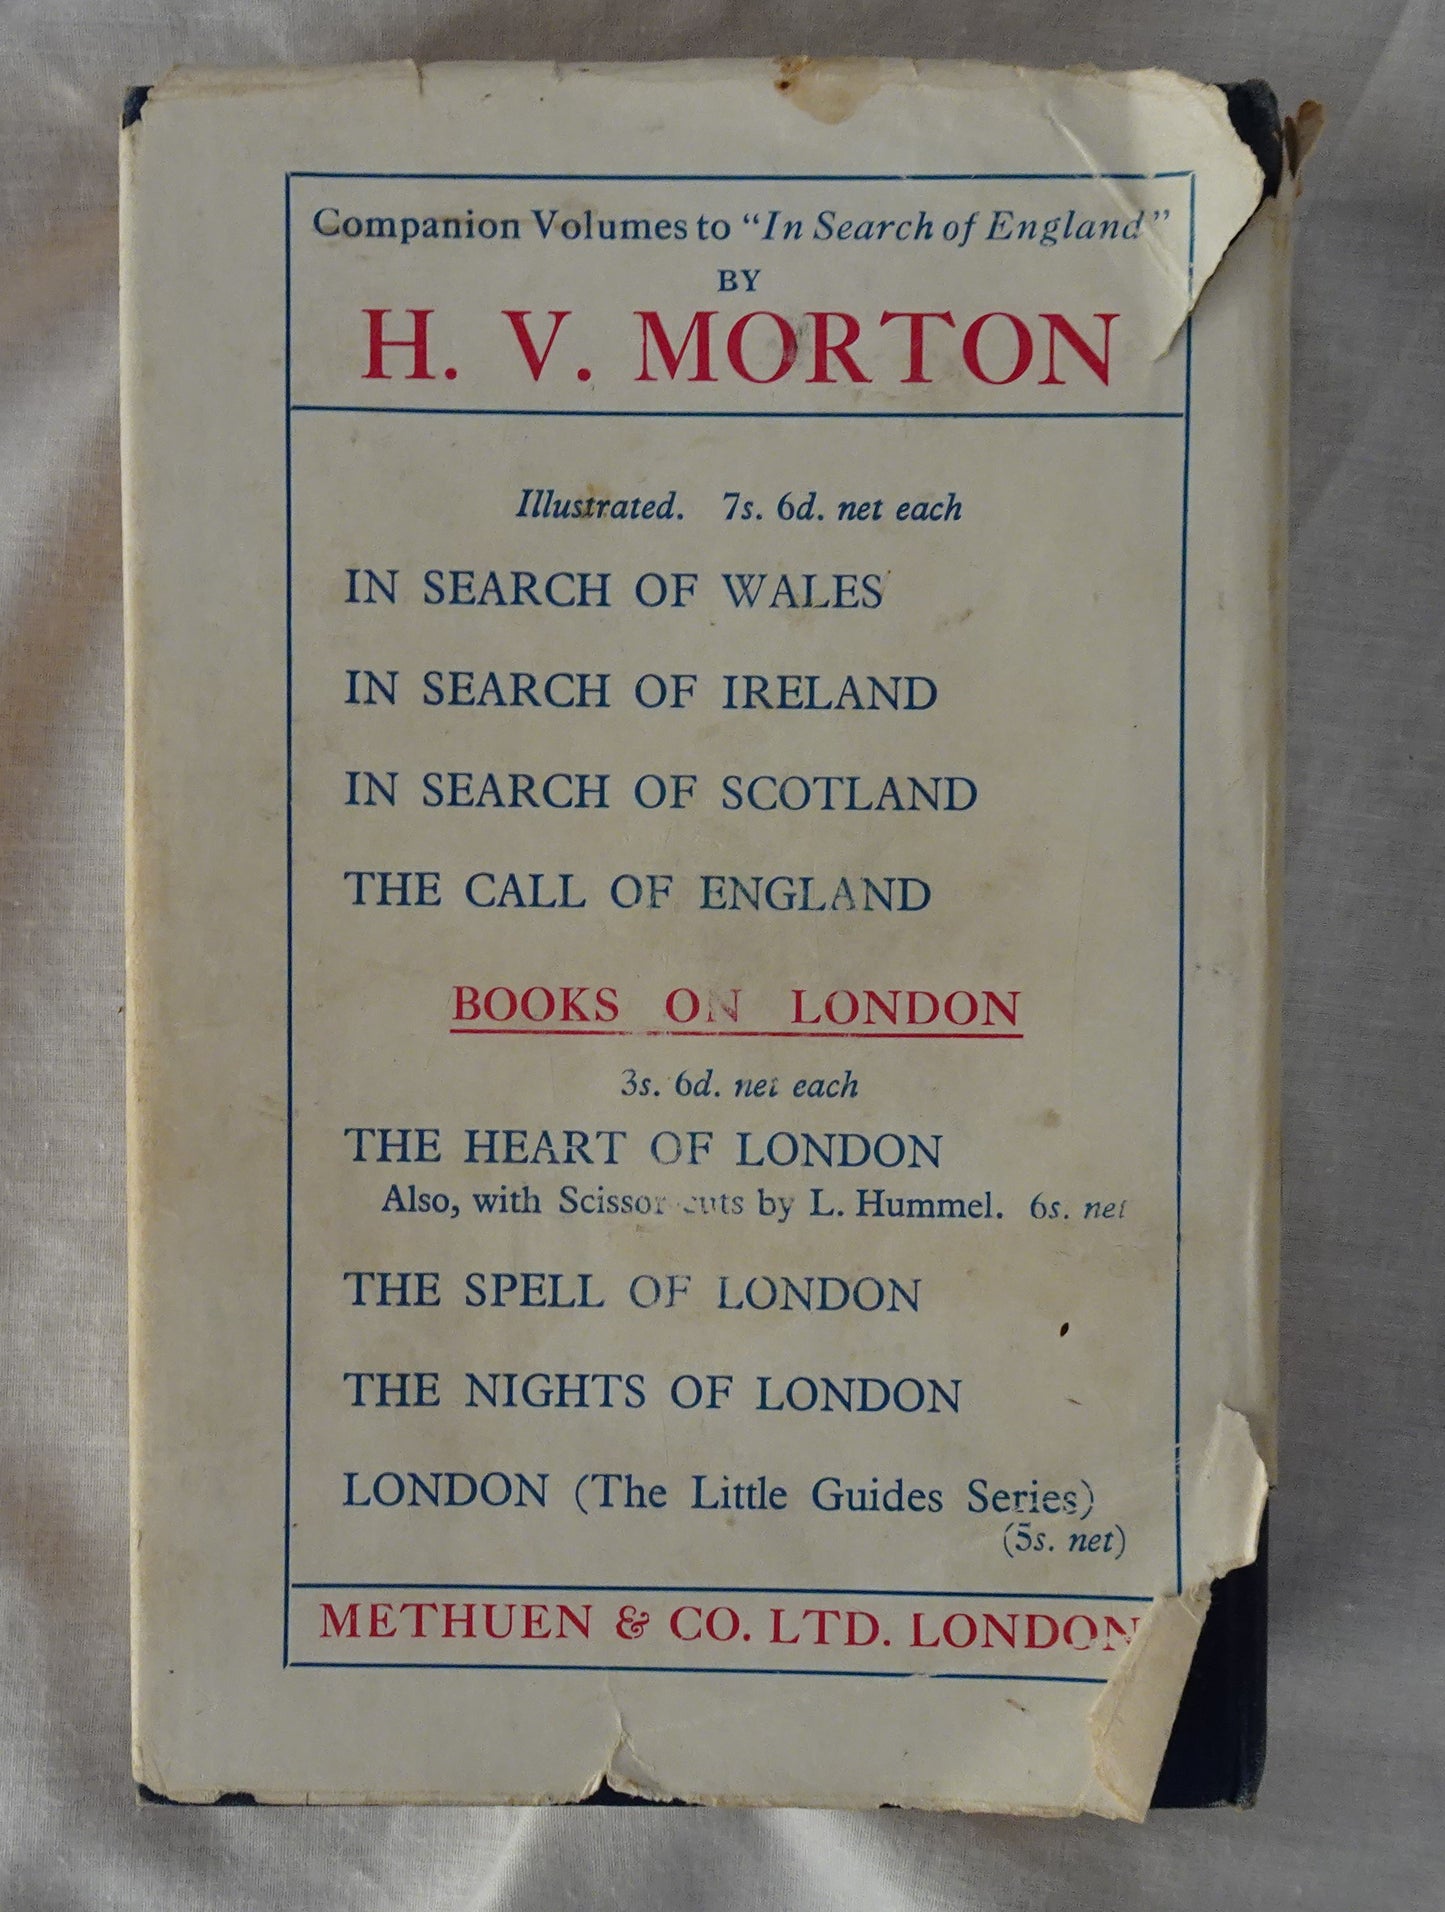 In Search of England by H. V. Morton